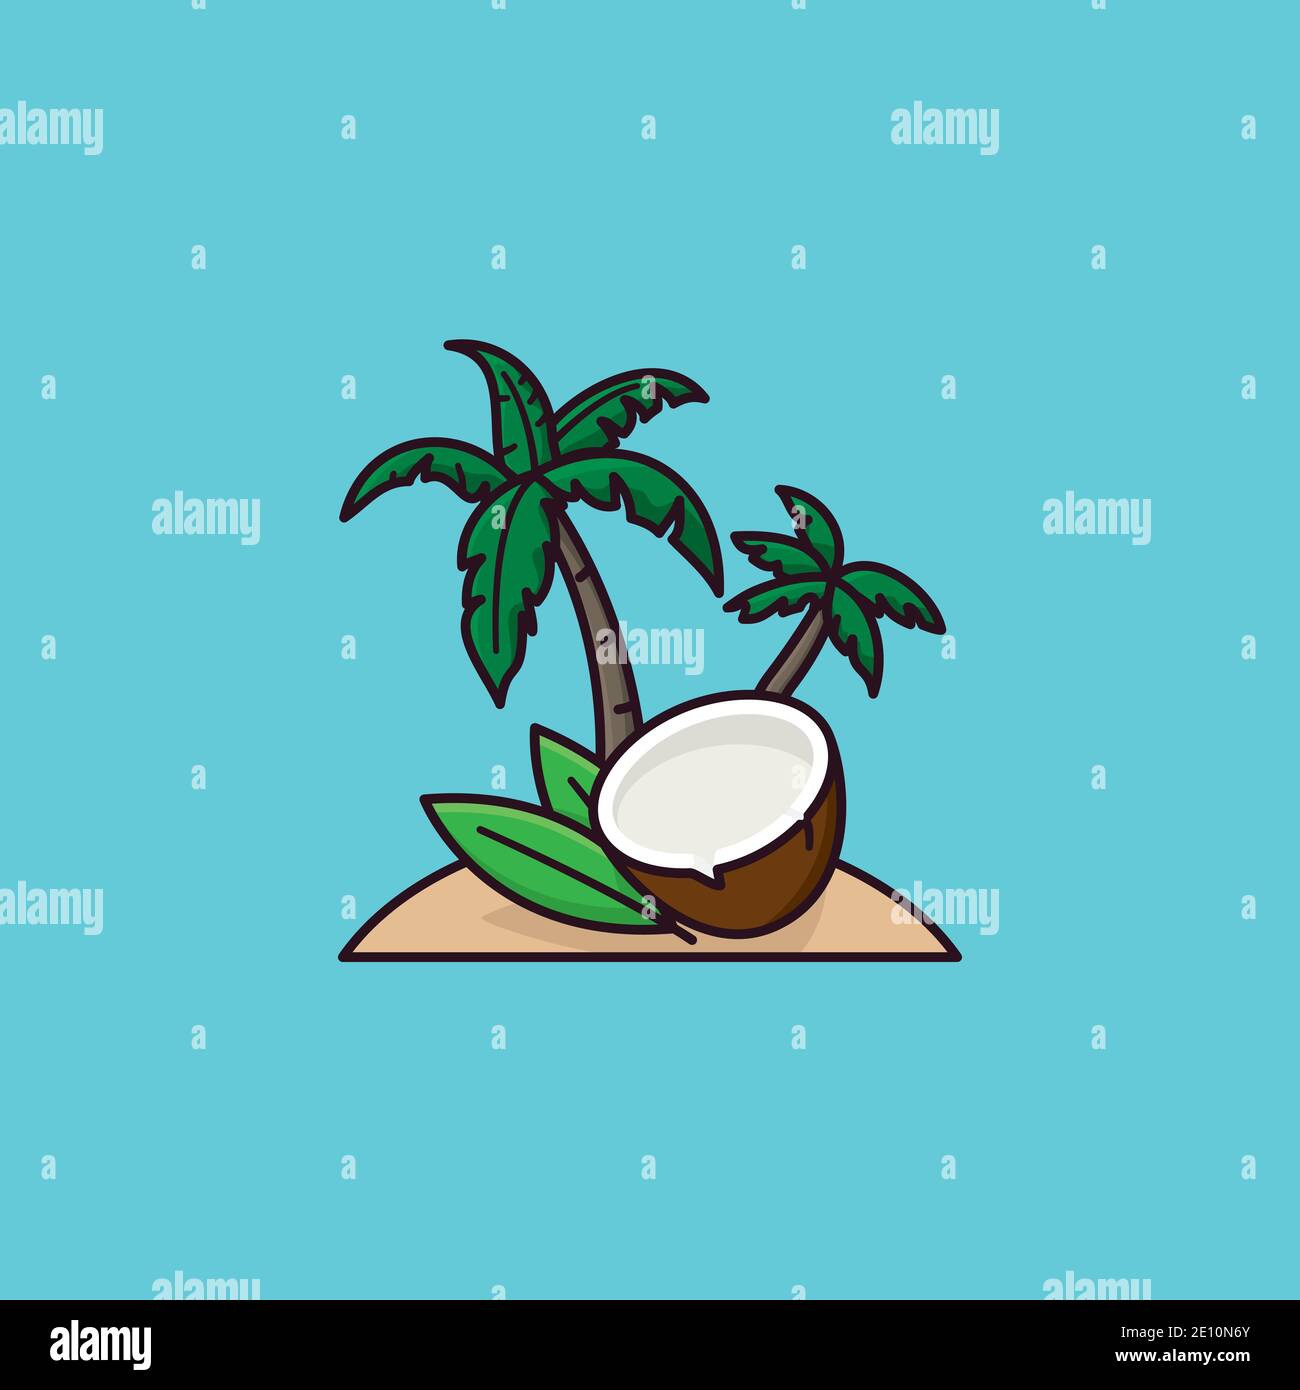 Tropical island with coconuts and palm trees vector illustration for World Coconut Day on September 2nd Stock Vector